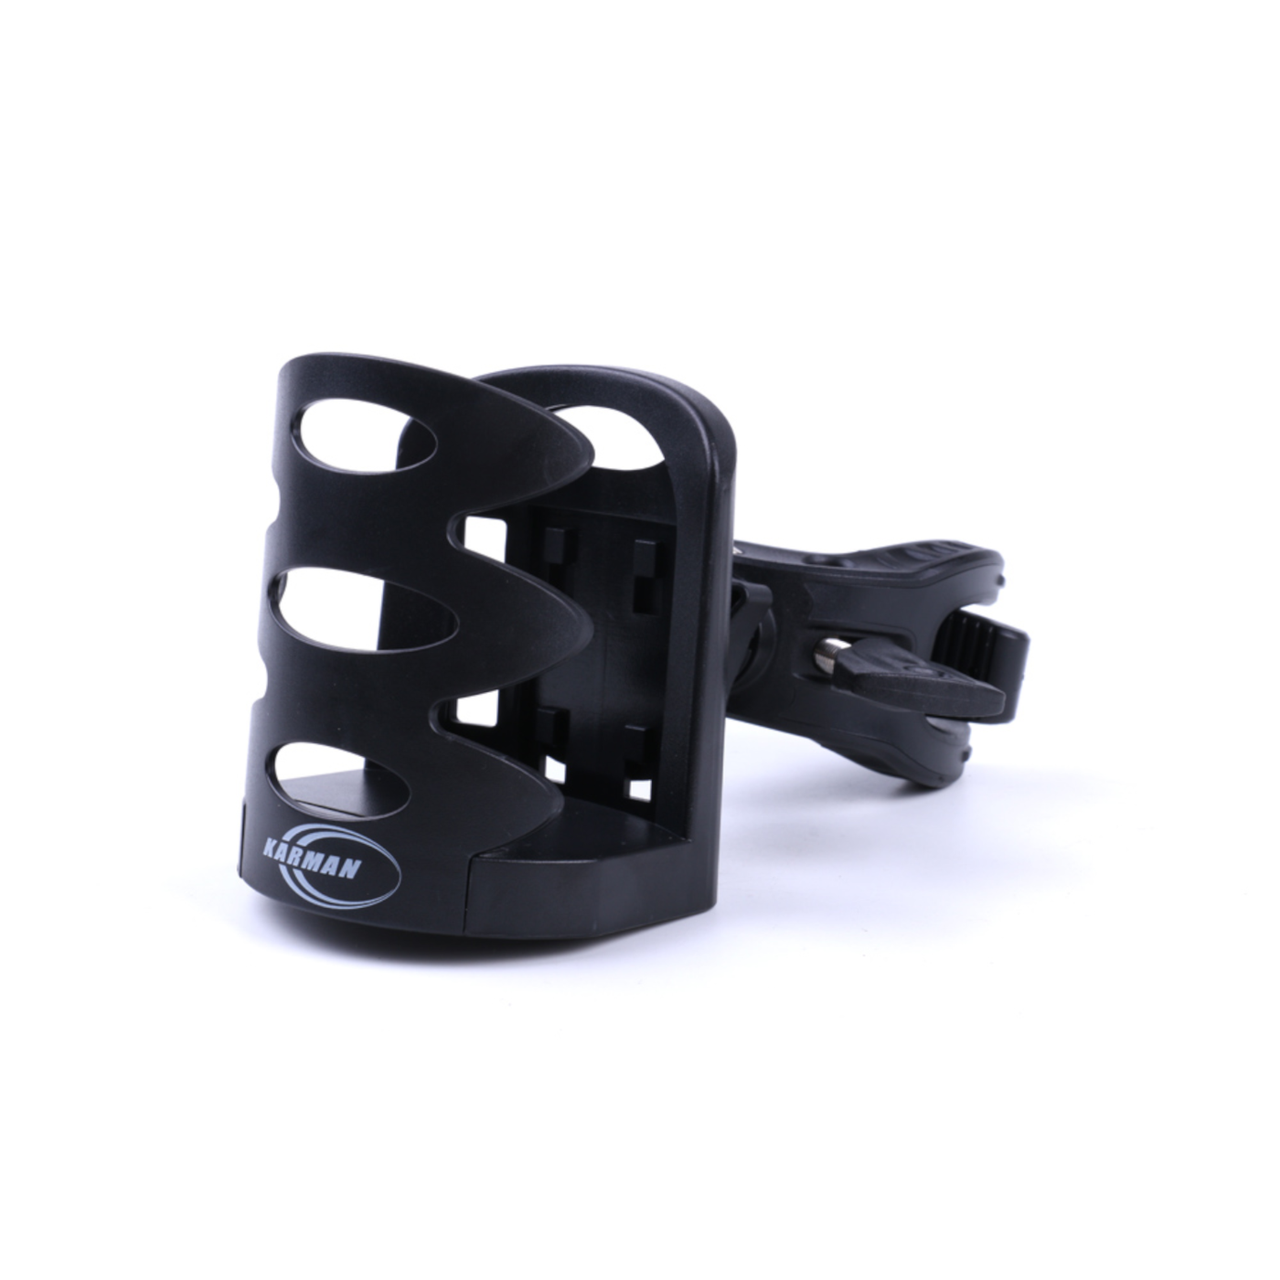 Karman Healthcare Universal Cup Holder for Wheelchairs Or Walkers - Senior.com Cup Holders